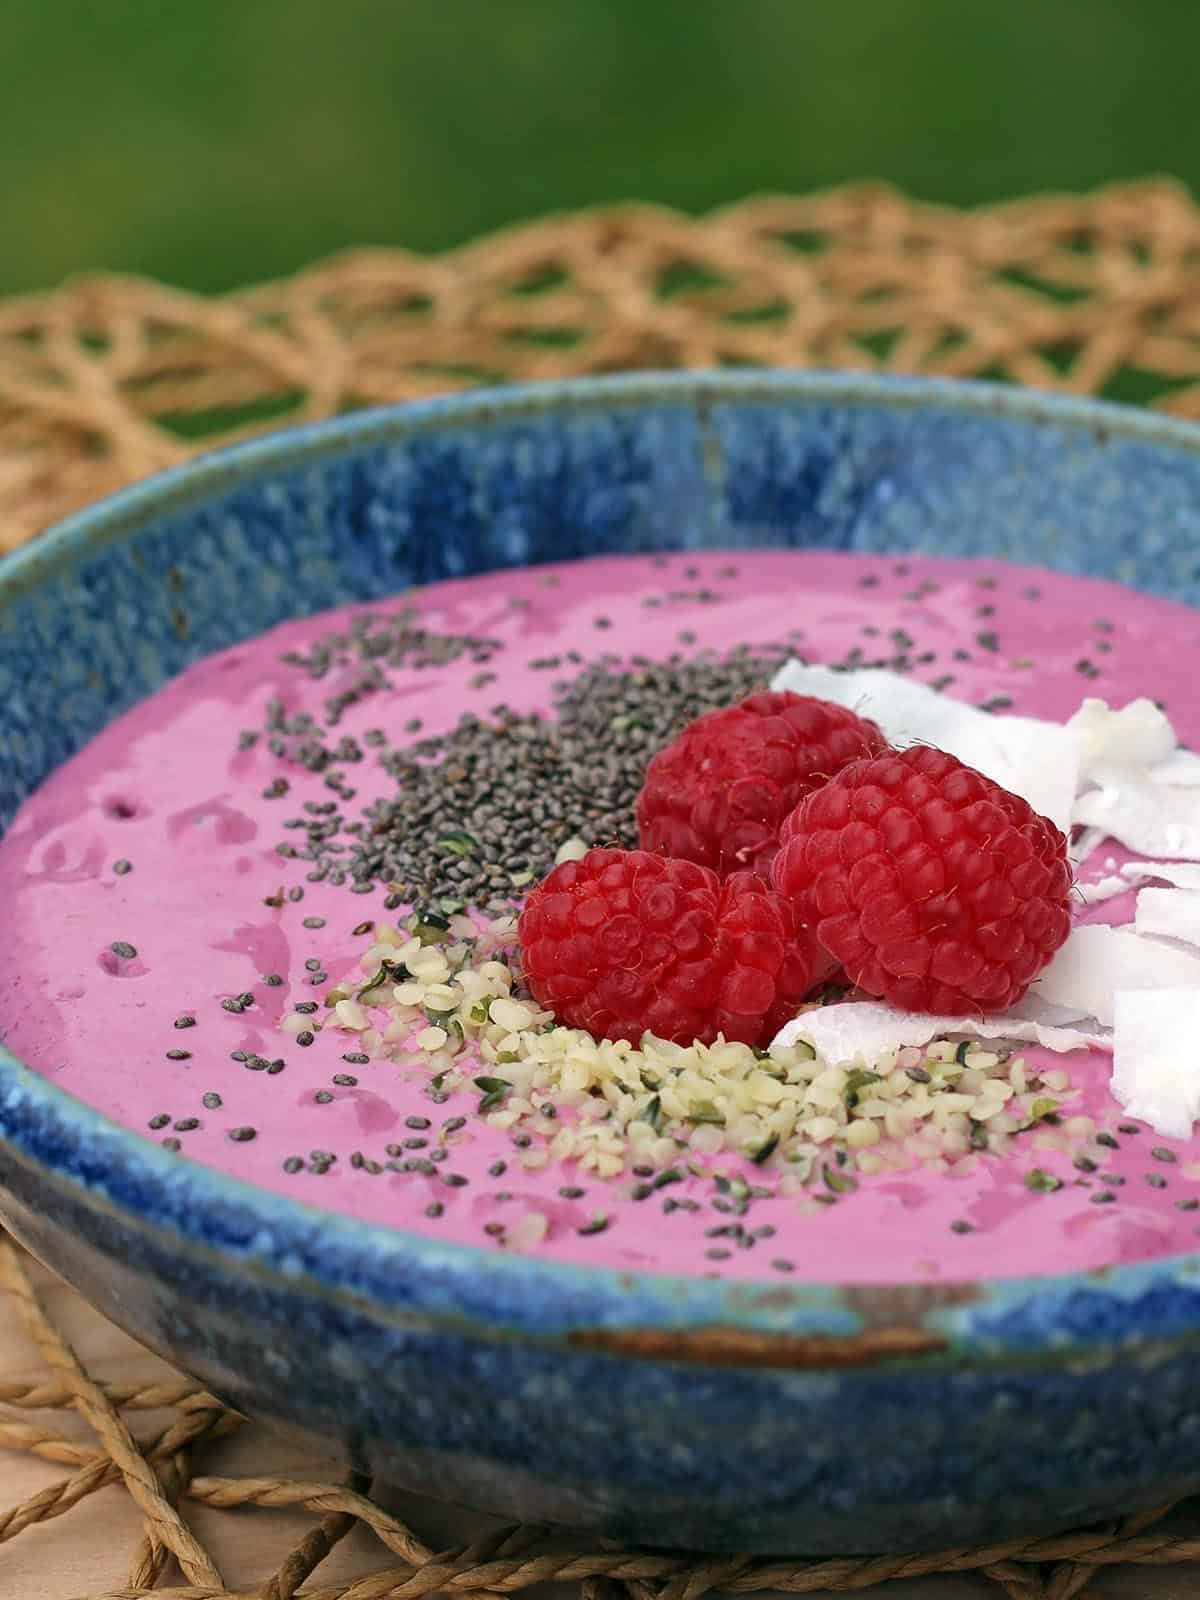 Berry Smoothie Bowl topped with chia seeds, hemp hearts, raspberries, and coconut flakes in a blue bowl